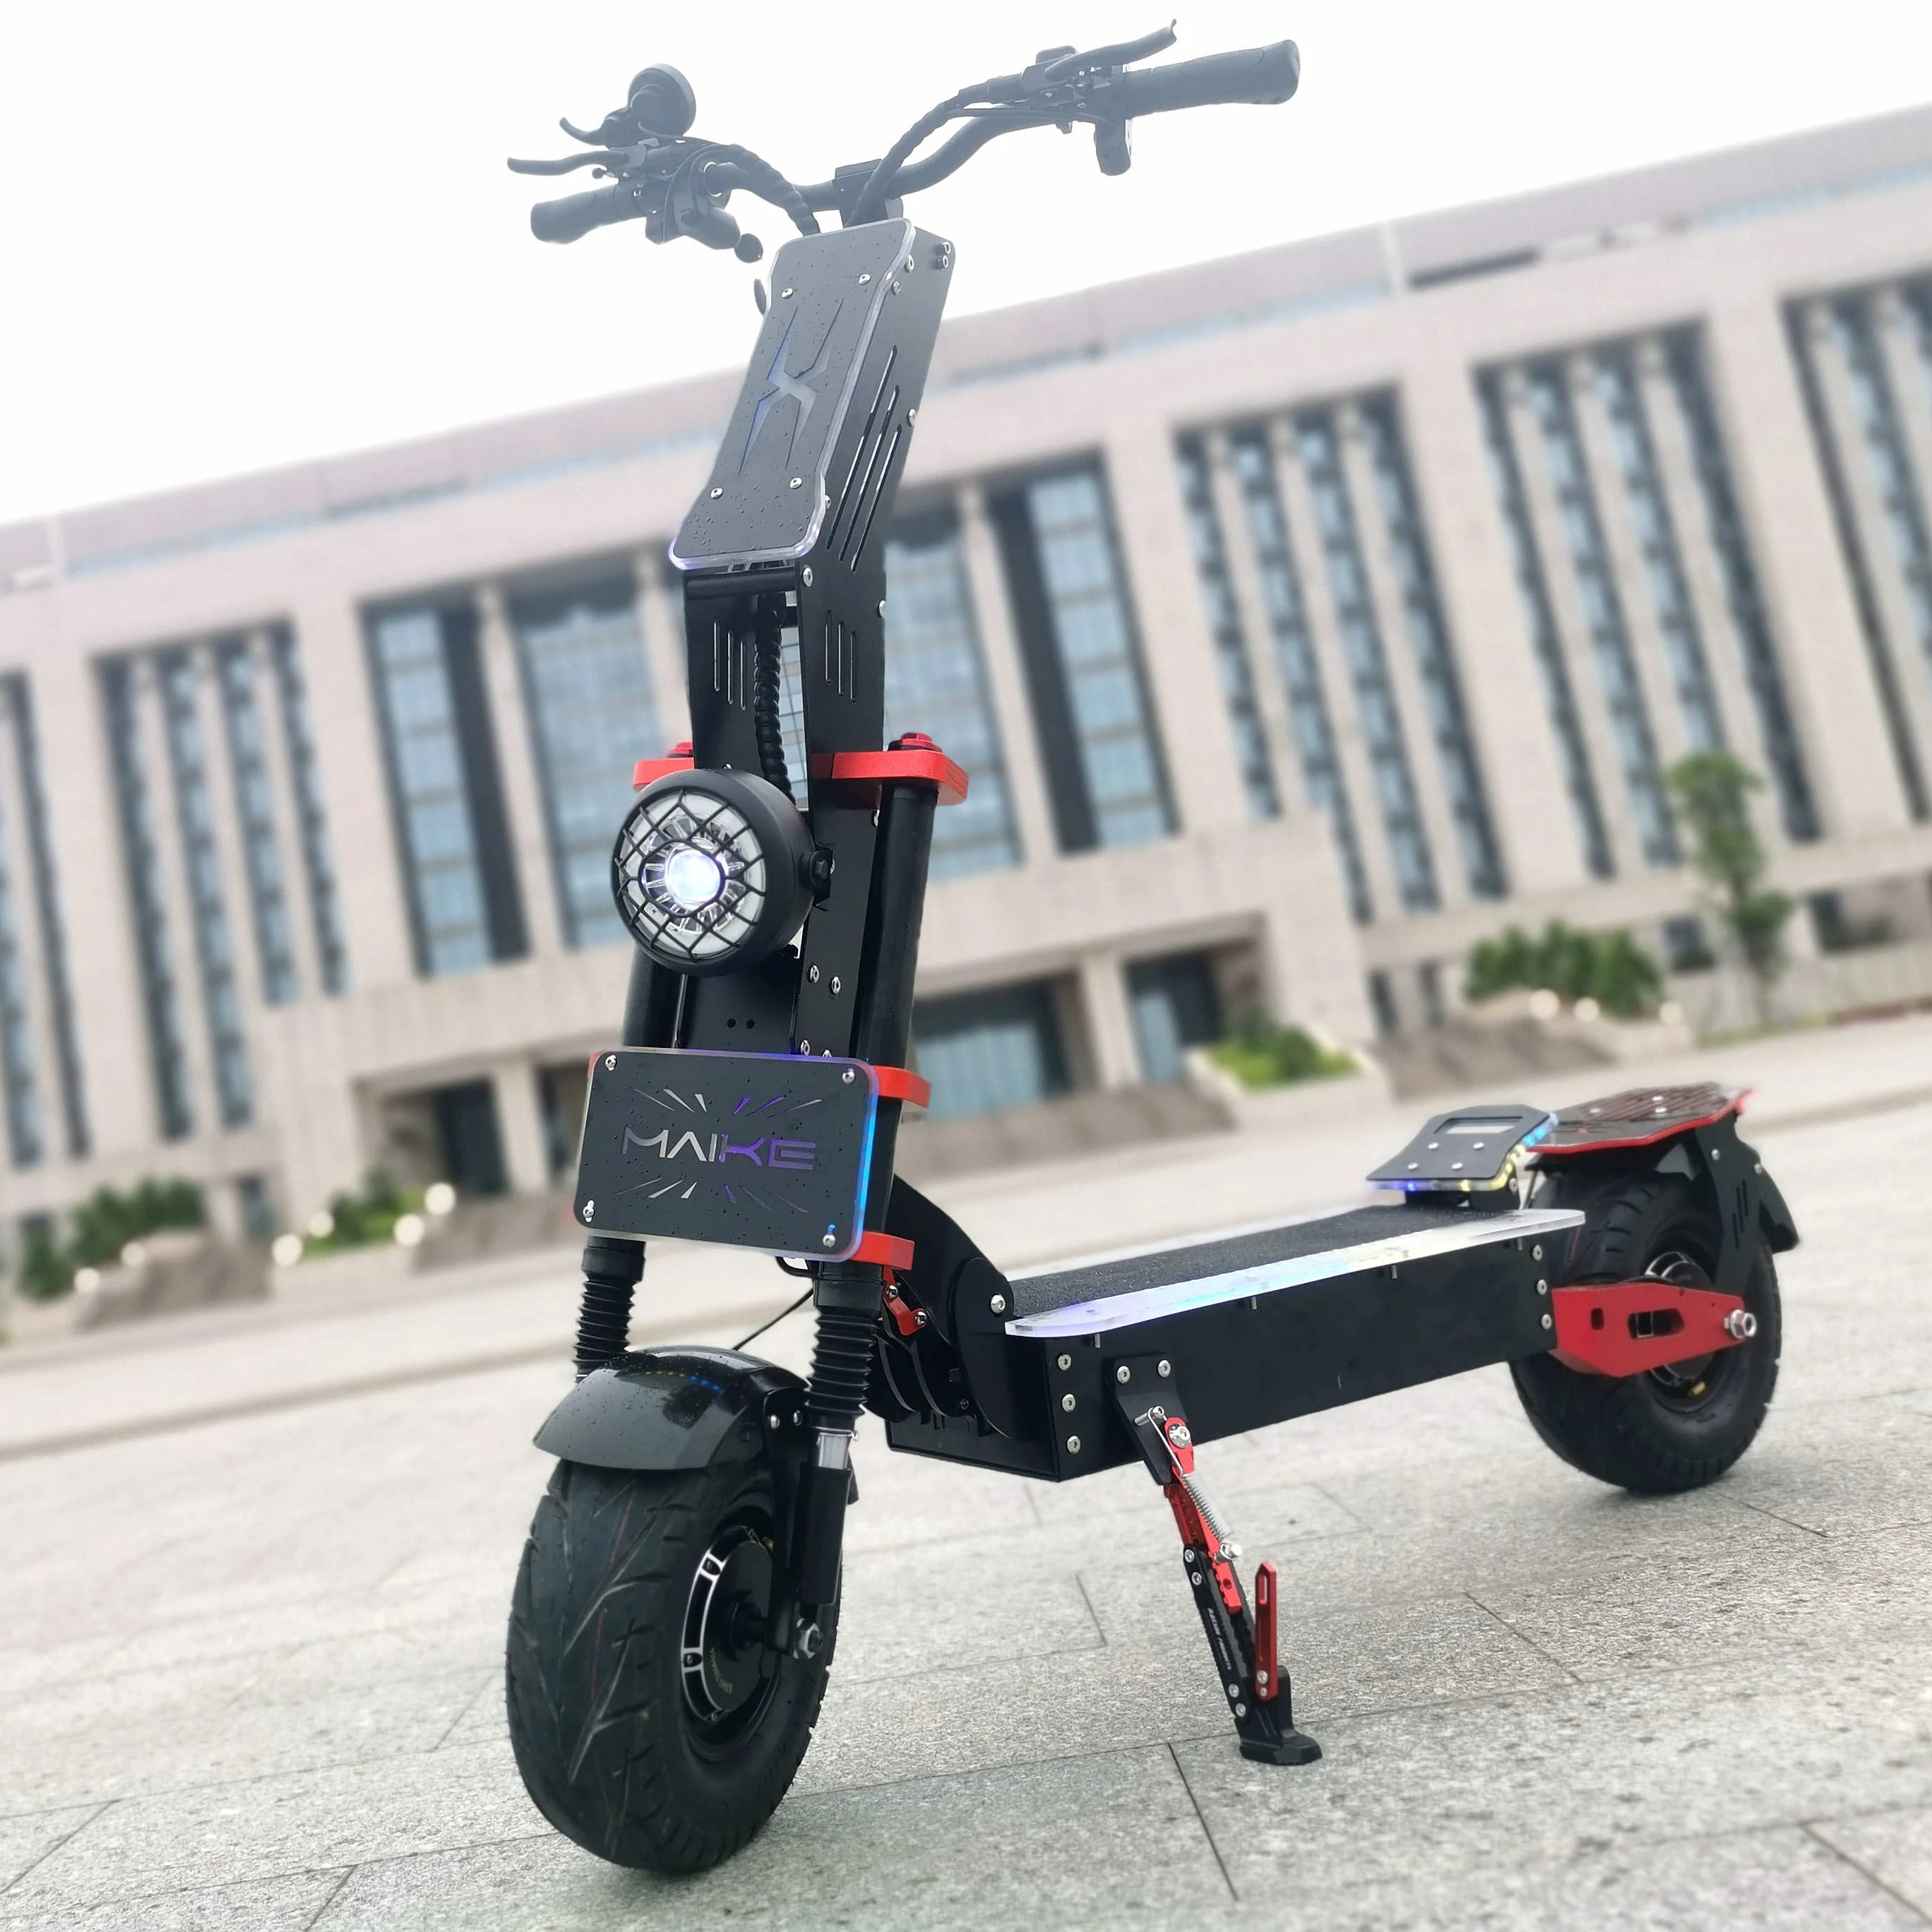 

Maike MKX new arrival powerful fat tire e scooter dual motor 35ah 8000w 4000w*2 long range Foldable electric scooter for adult